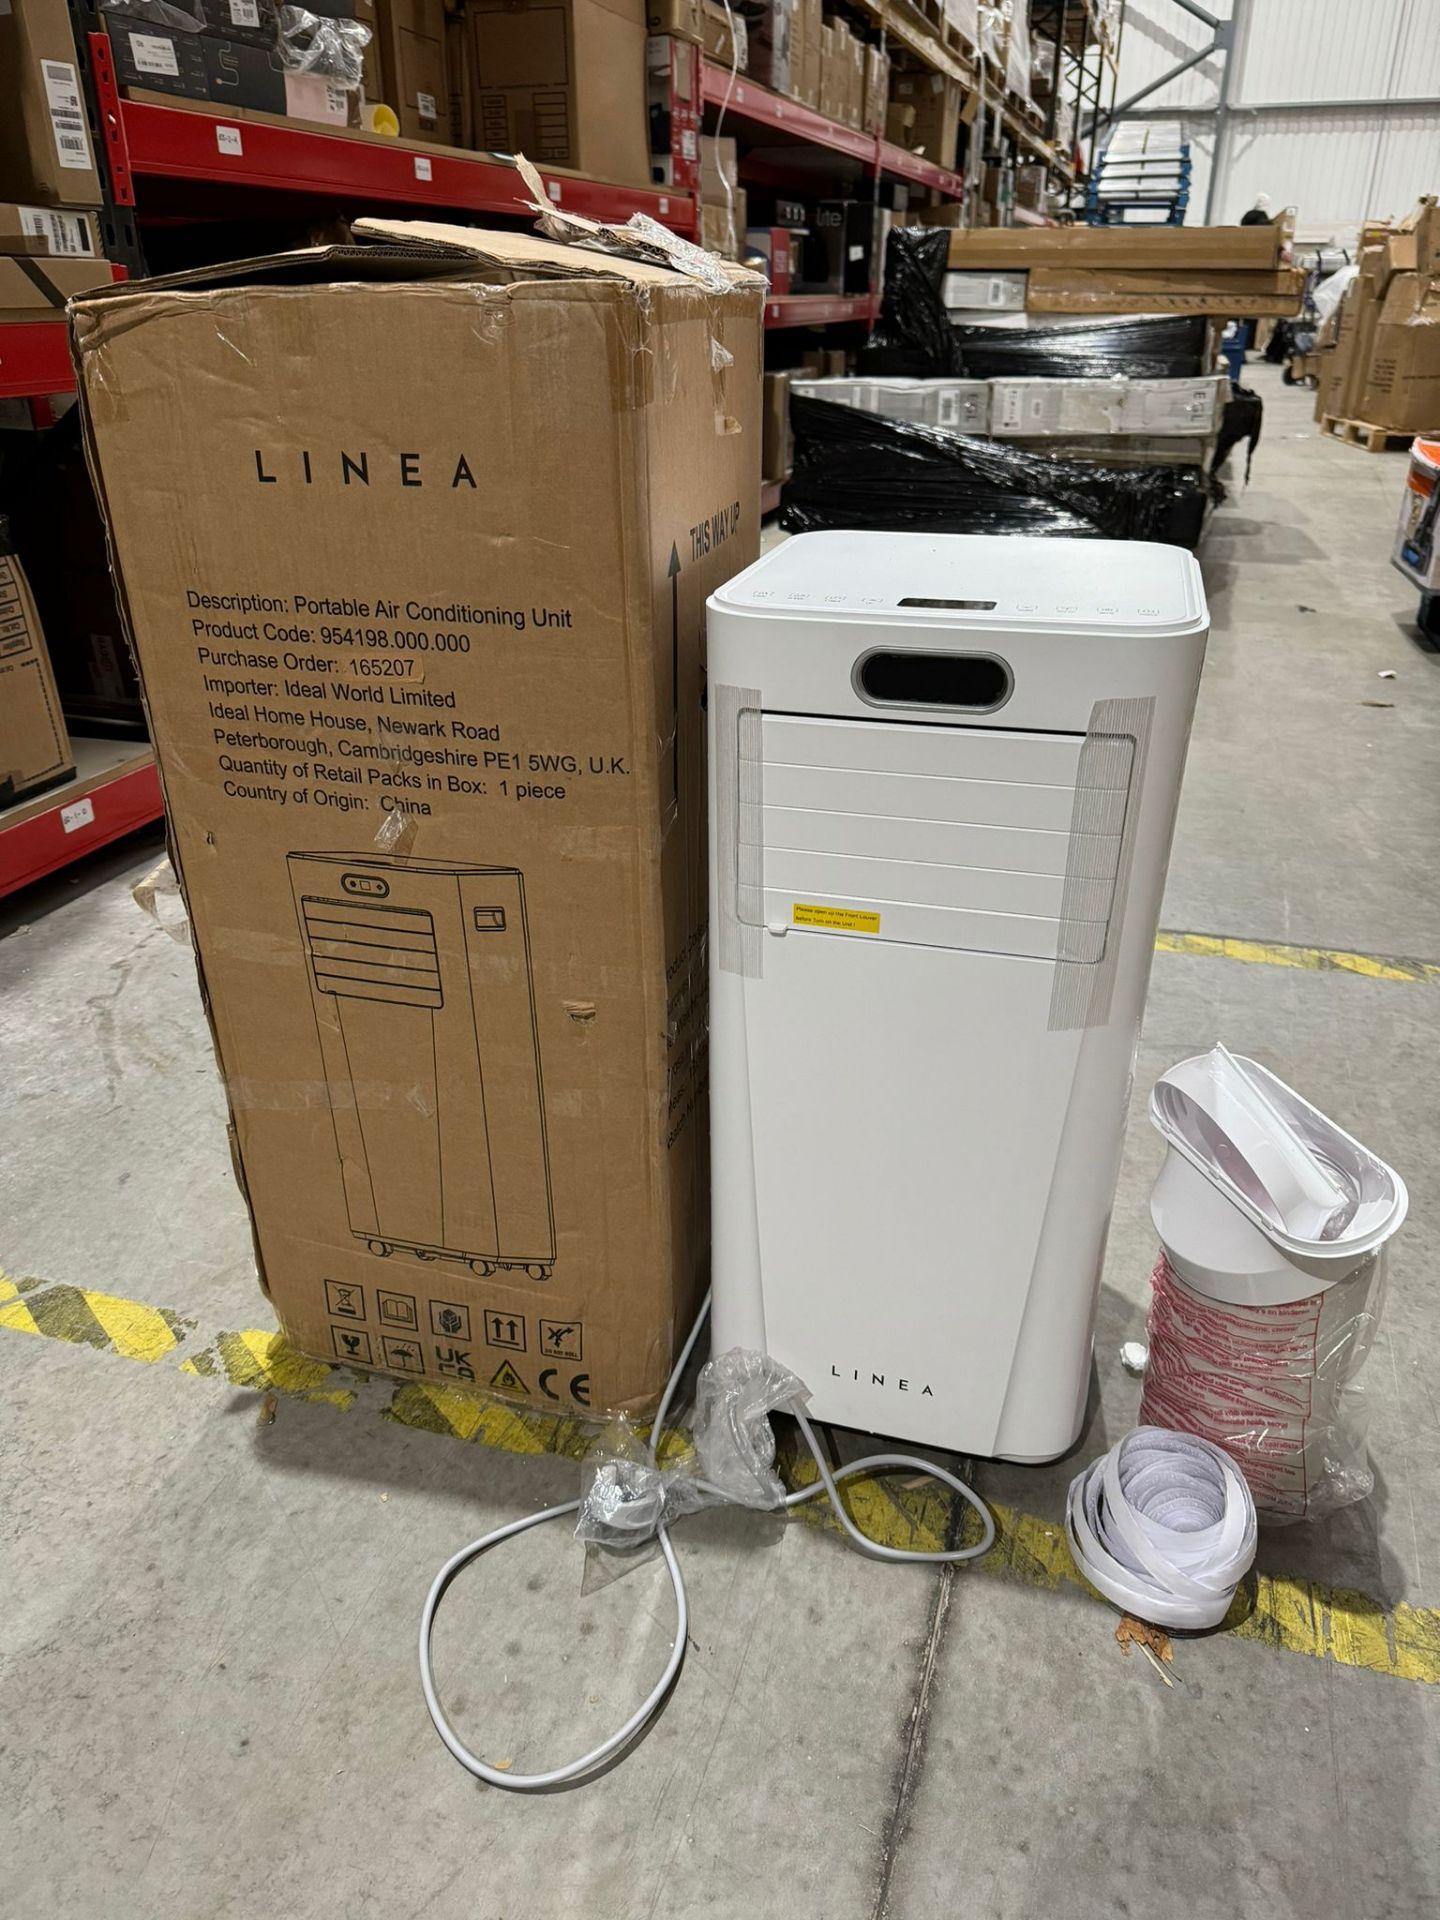 1 x LINEA Portable Air Conditioning Unit - 954198.000.000 with Window Kit - NO RESERVE - Image 5 of 8